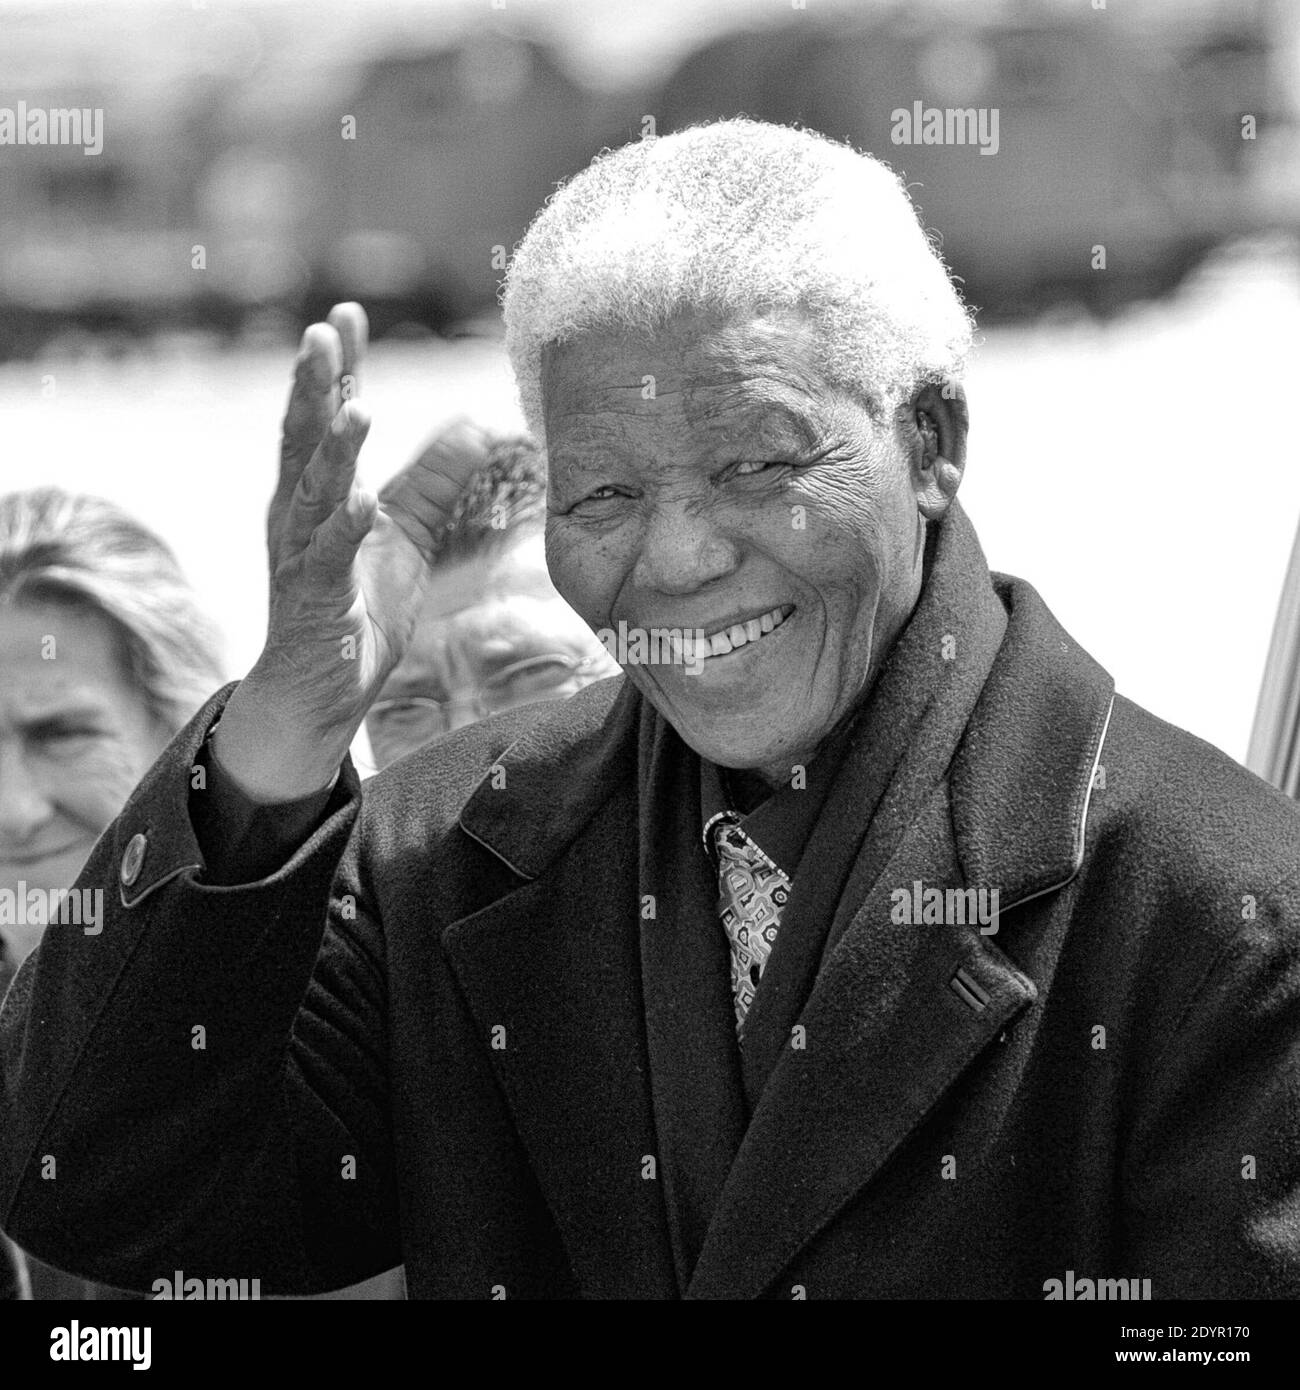 Former South African president Nelson Mandela and his wife Graca Machel arrive at Madrid airport on May 21, 2004 one day before the royal wedding of Spain's Crown Prince Felipe and Letizia Ortiz. Photo by Ammar-Hounsfield-Klein-Mousse-Zabulon/ABACAPRESS.COM Stock Photo